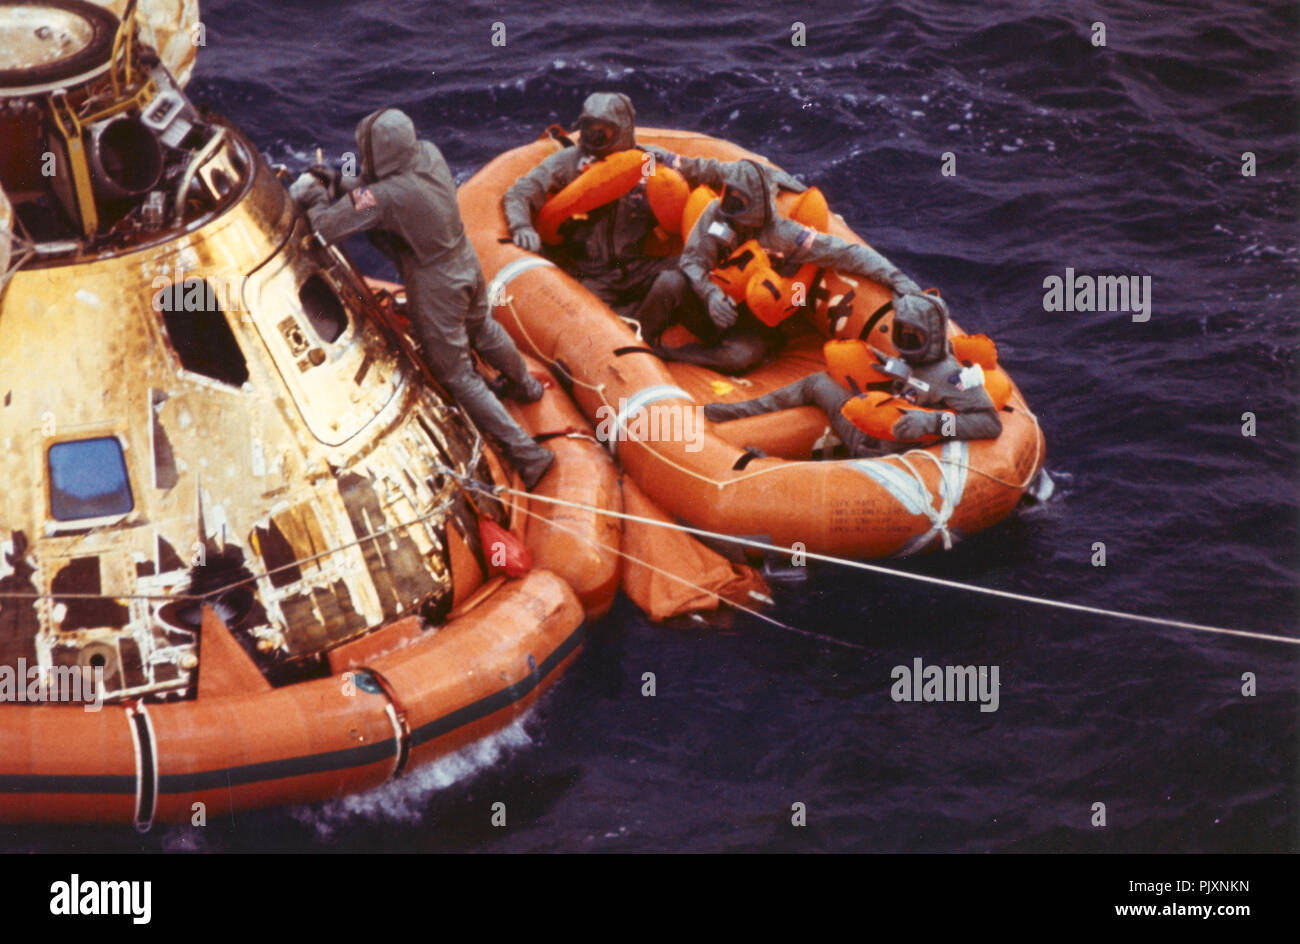 Pacific Ocean - (FILE) -- Pararescueman Lieutenant Clancy Hatleberg closes the Apollo 11 spacecraft hatch as astronauts Neil Armstrong, Michael Collins, and Buzz Aldrin, Jr., await helicopter pickup from their life raft. They splashed down at 12:50 pm EDT July 24, 1969, 900 miles southwest of Hawaii after a successful lunar landing mission. Credit: NASA via CNP /MediaPunch Stock Photo